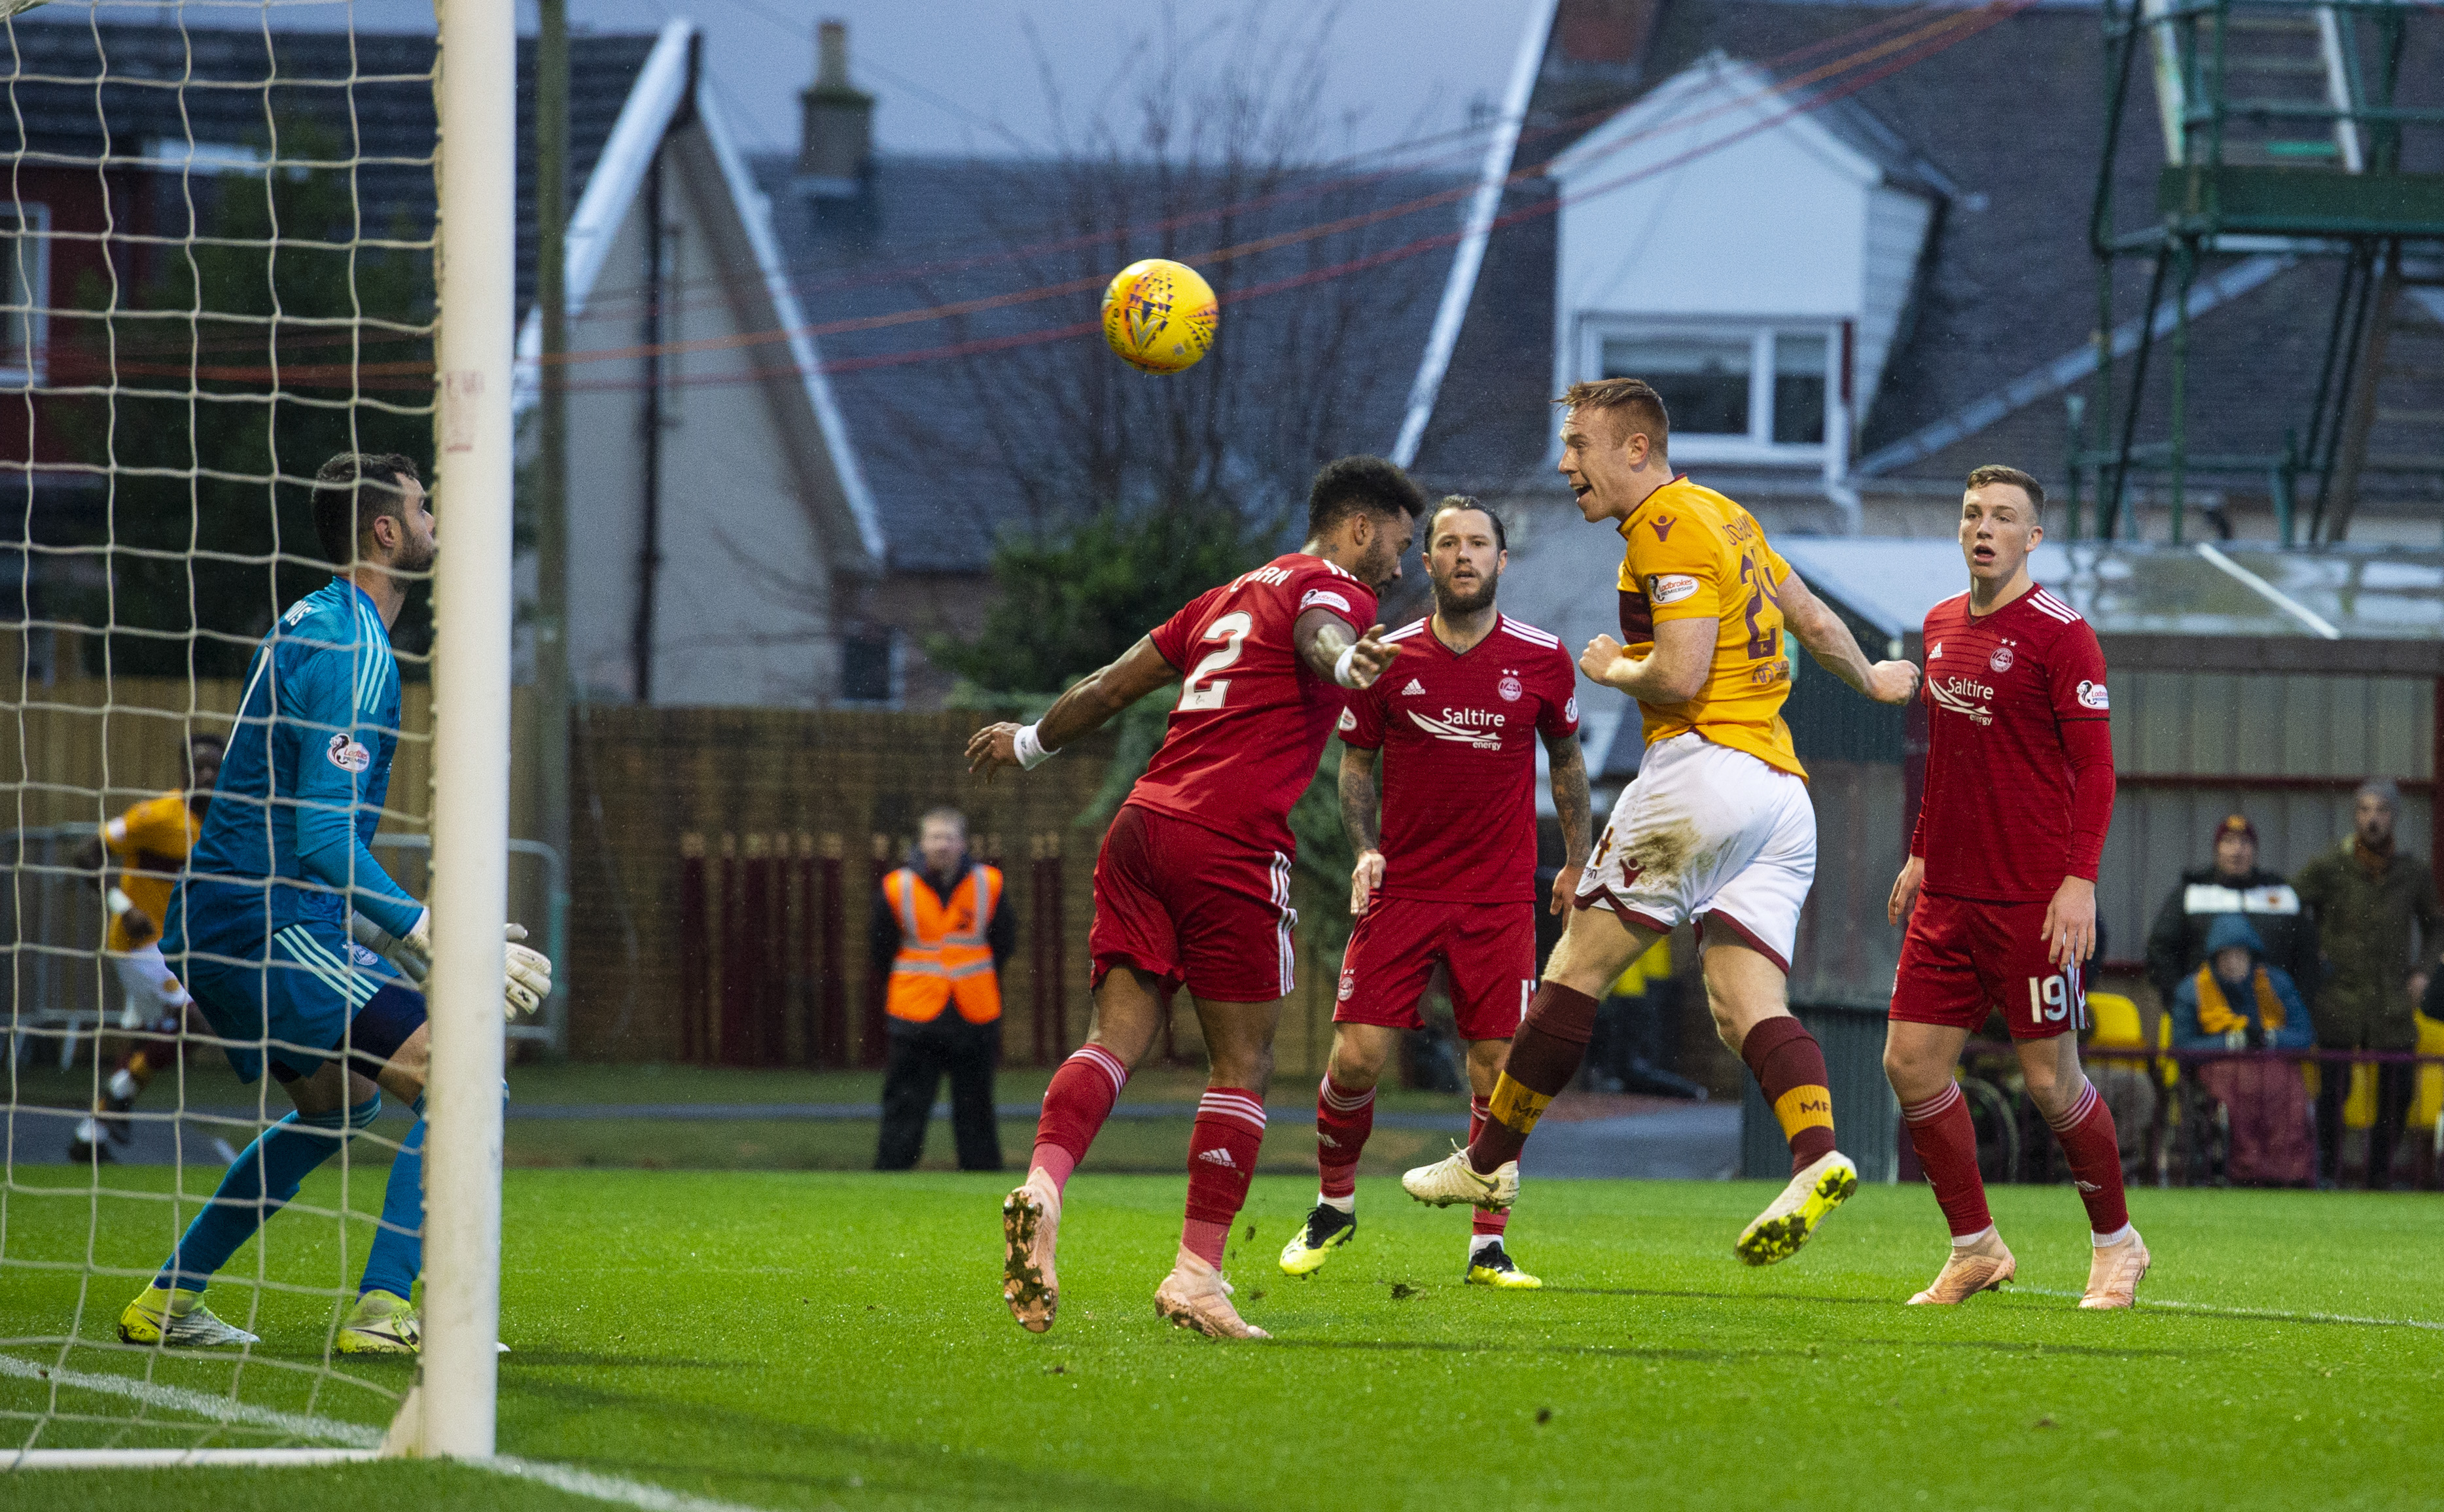 Motherwell's Danny Johnson heads home to make it 2-0